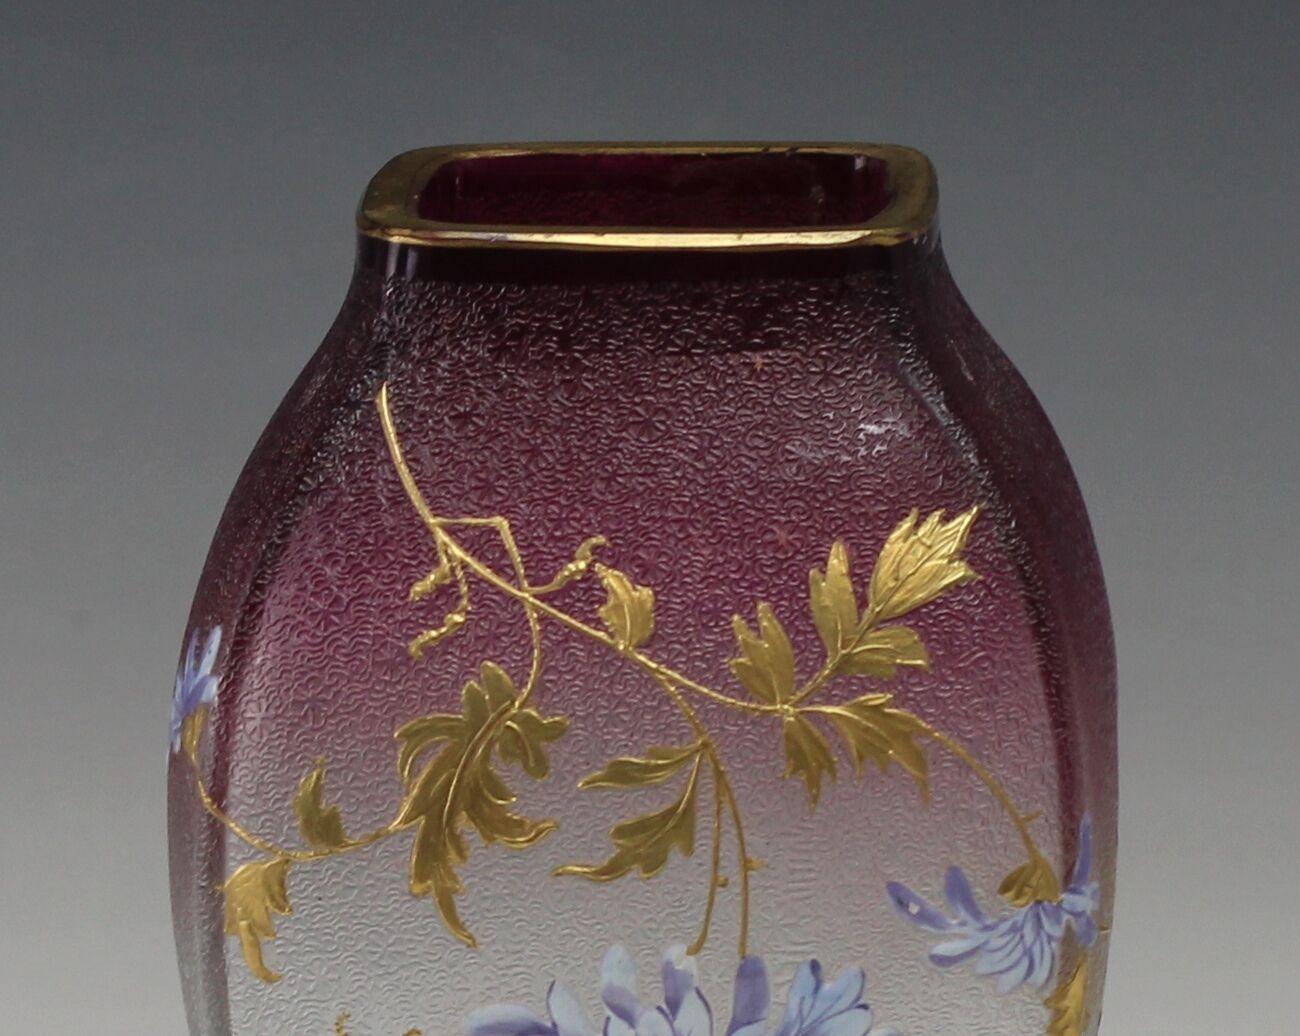 Continenal Art Glass Vase Cranberry to Clear Hand Painted Enamel, c1900 

Hand painted raised enamel and gilt flowers. Exquisite overall texture.

Additional Information:
Type: Vase 
Material: Glass, Enamel
Brand: Unbranded 
Color: